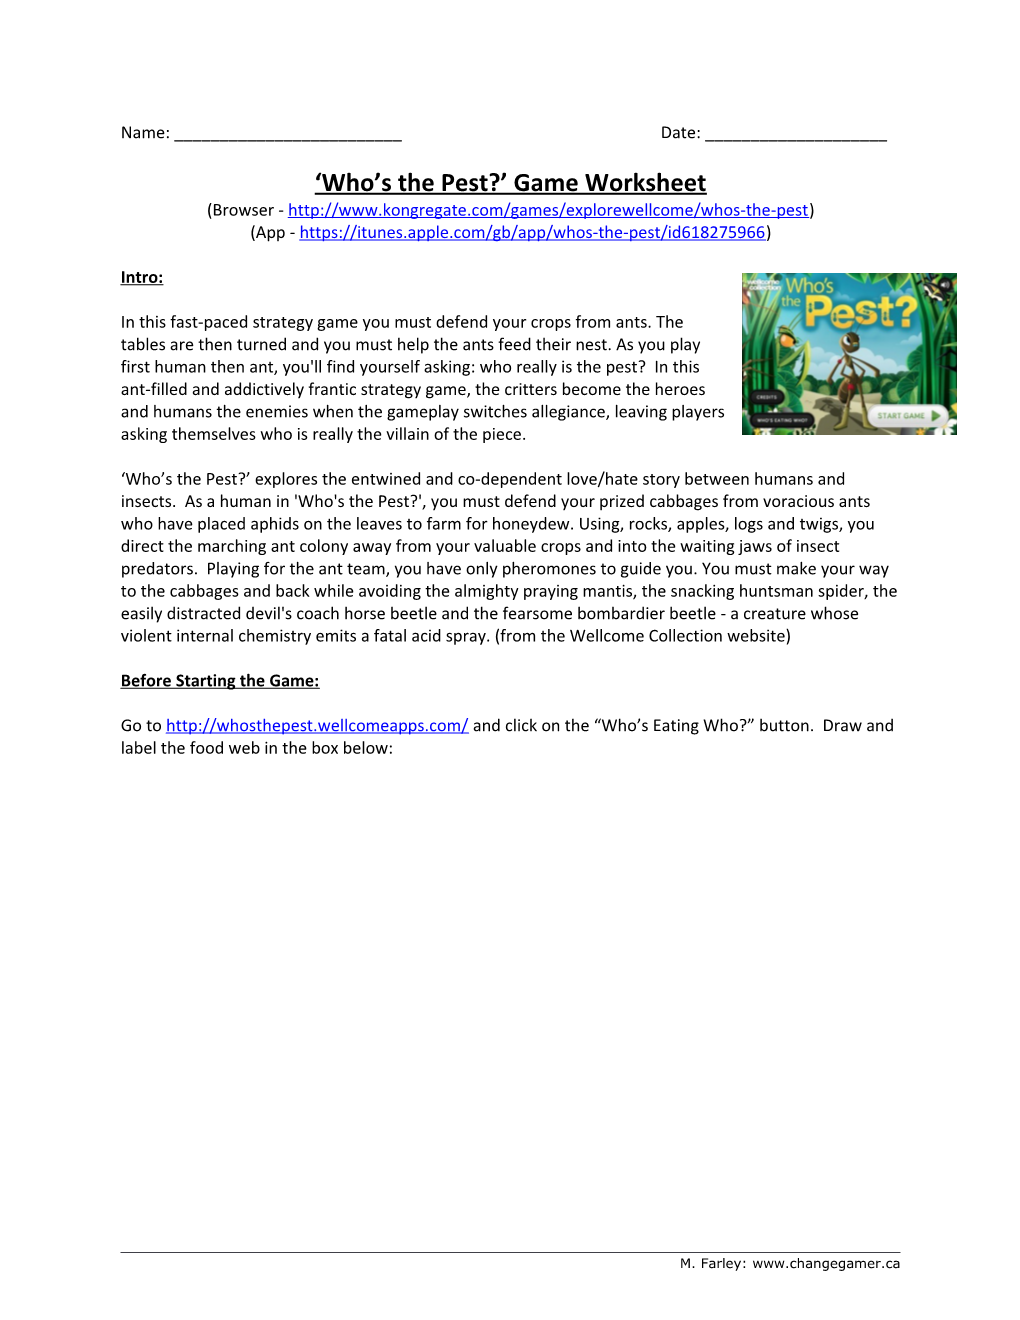 Who S the Pest? Game Worksheet